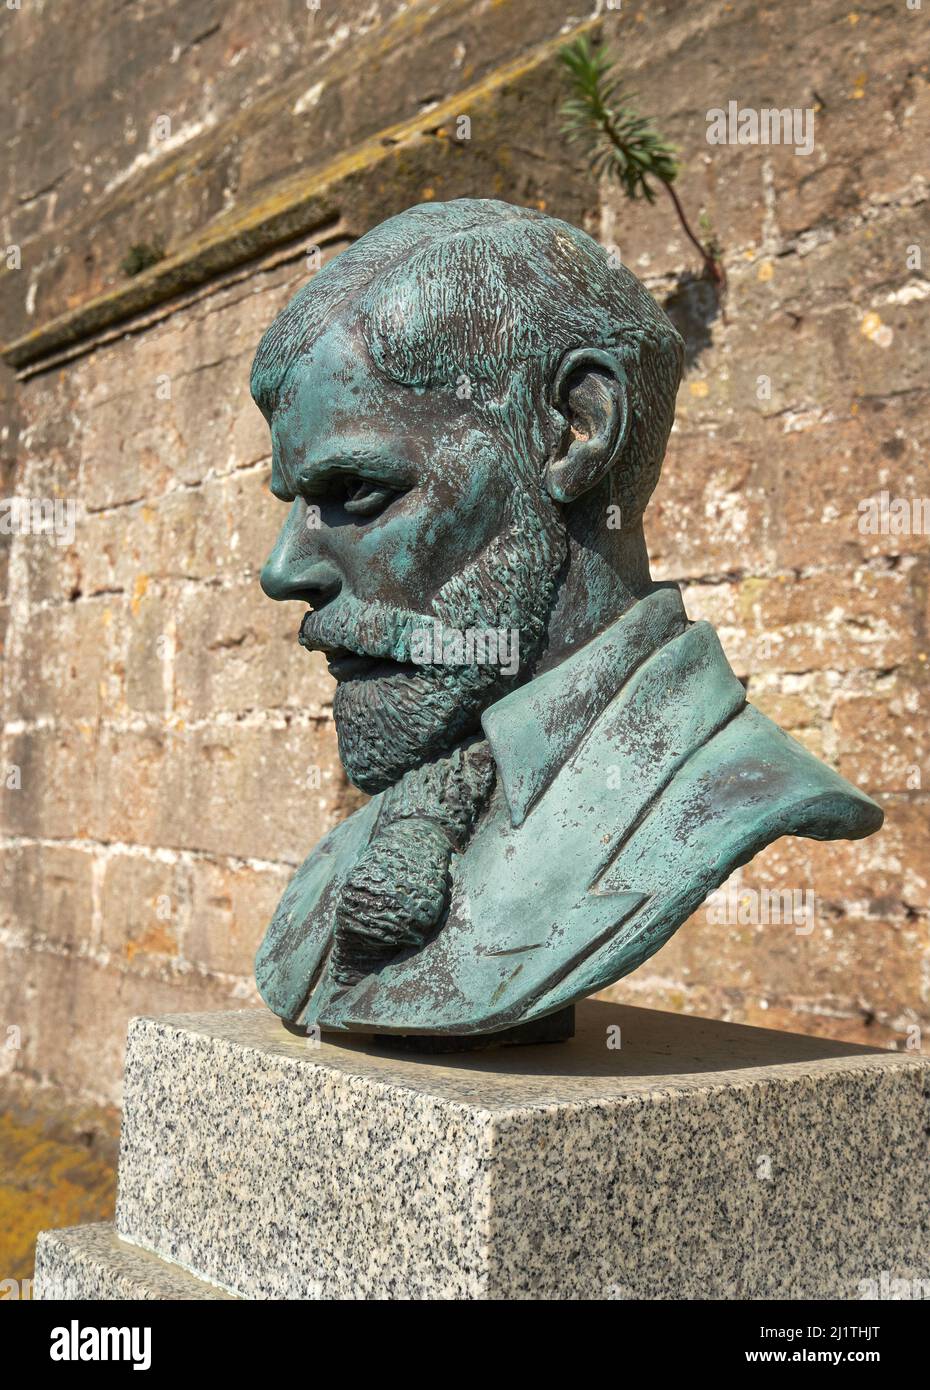 Old bronze statue of a historical figure Stock Photo